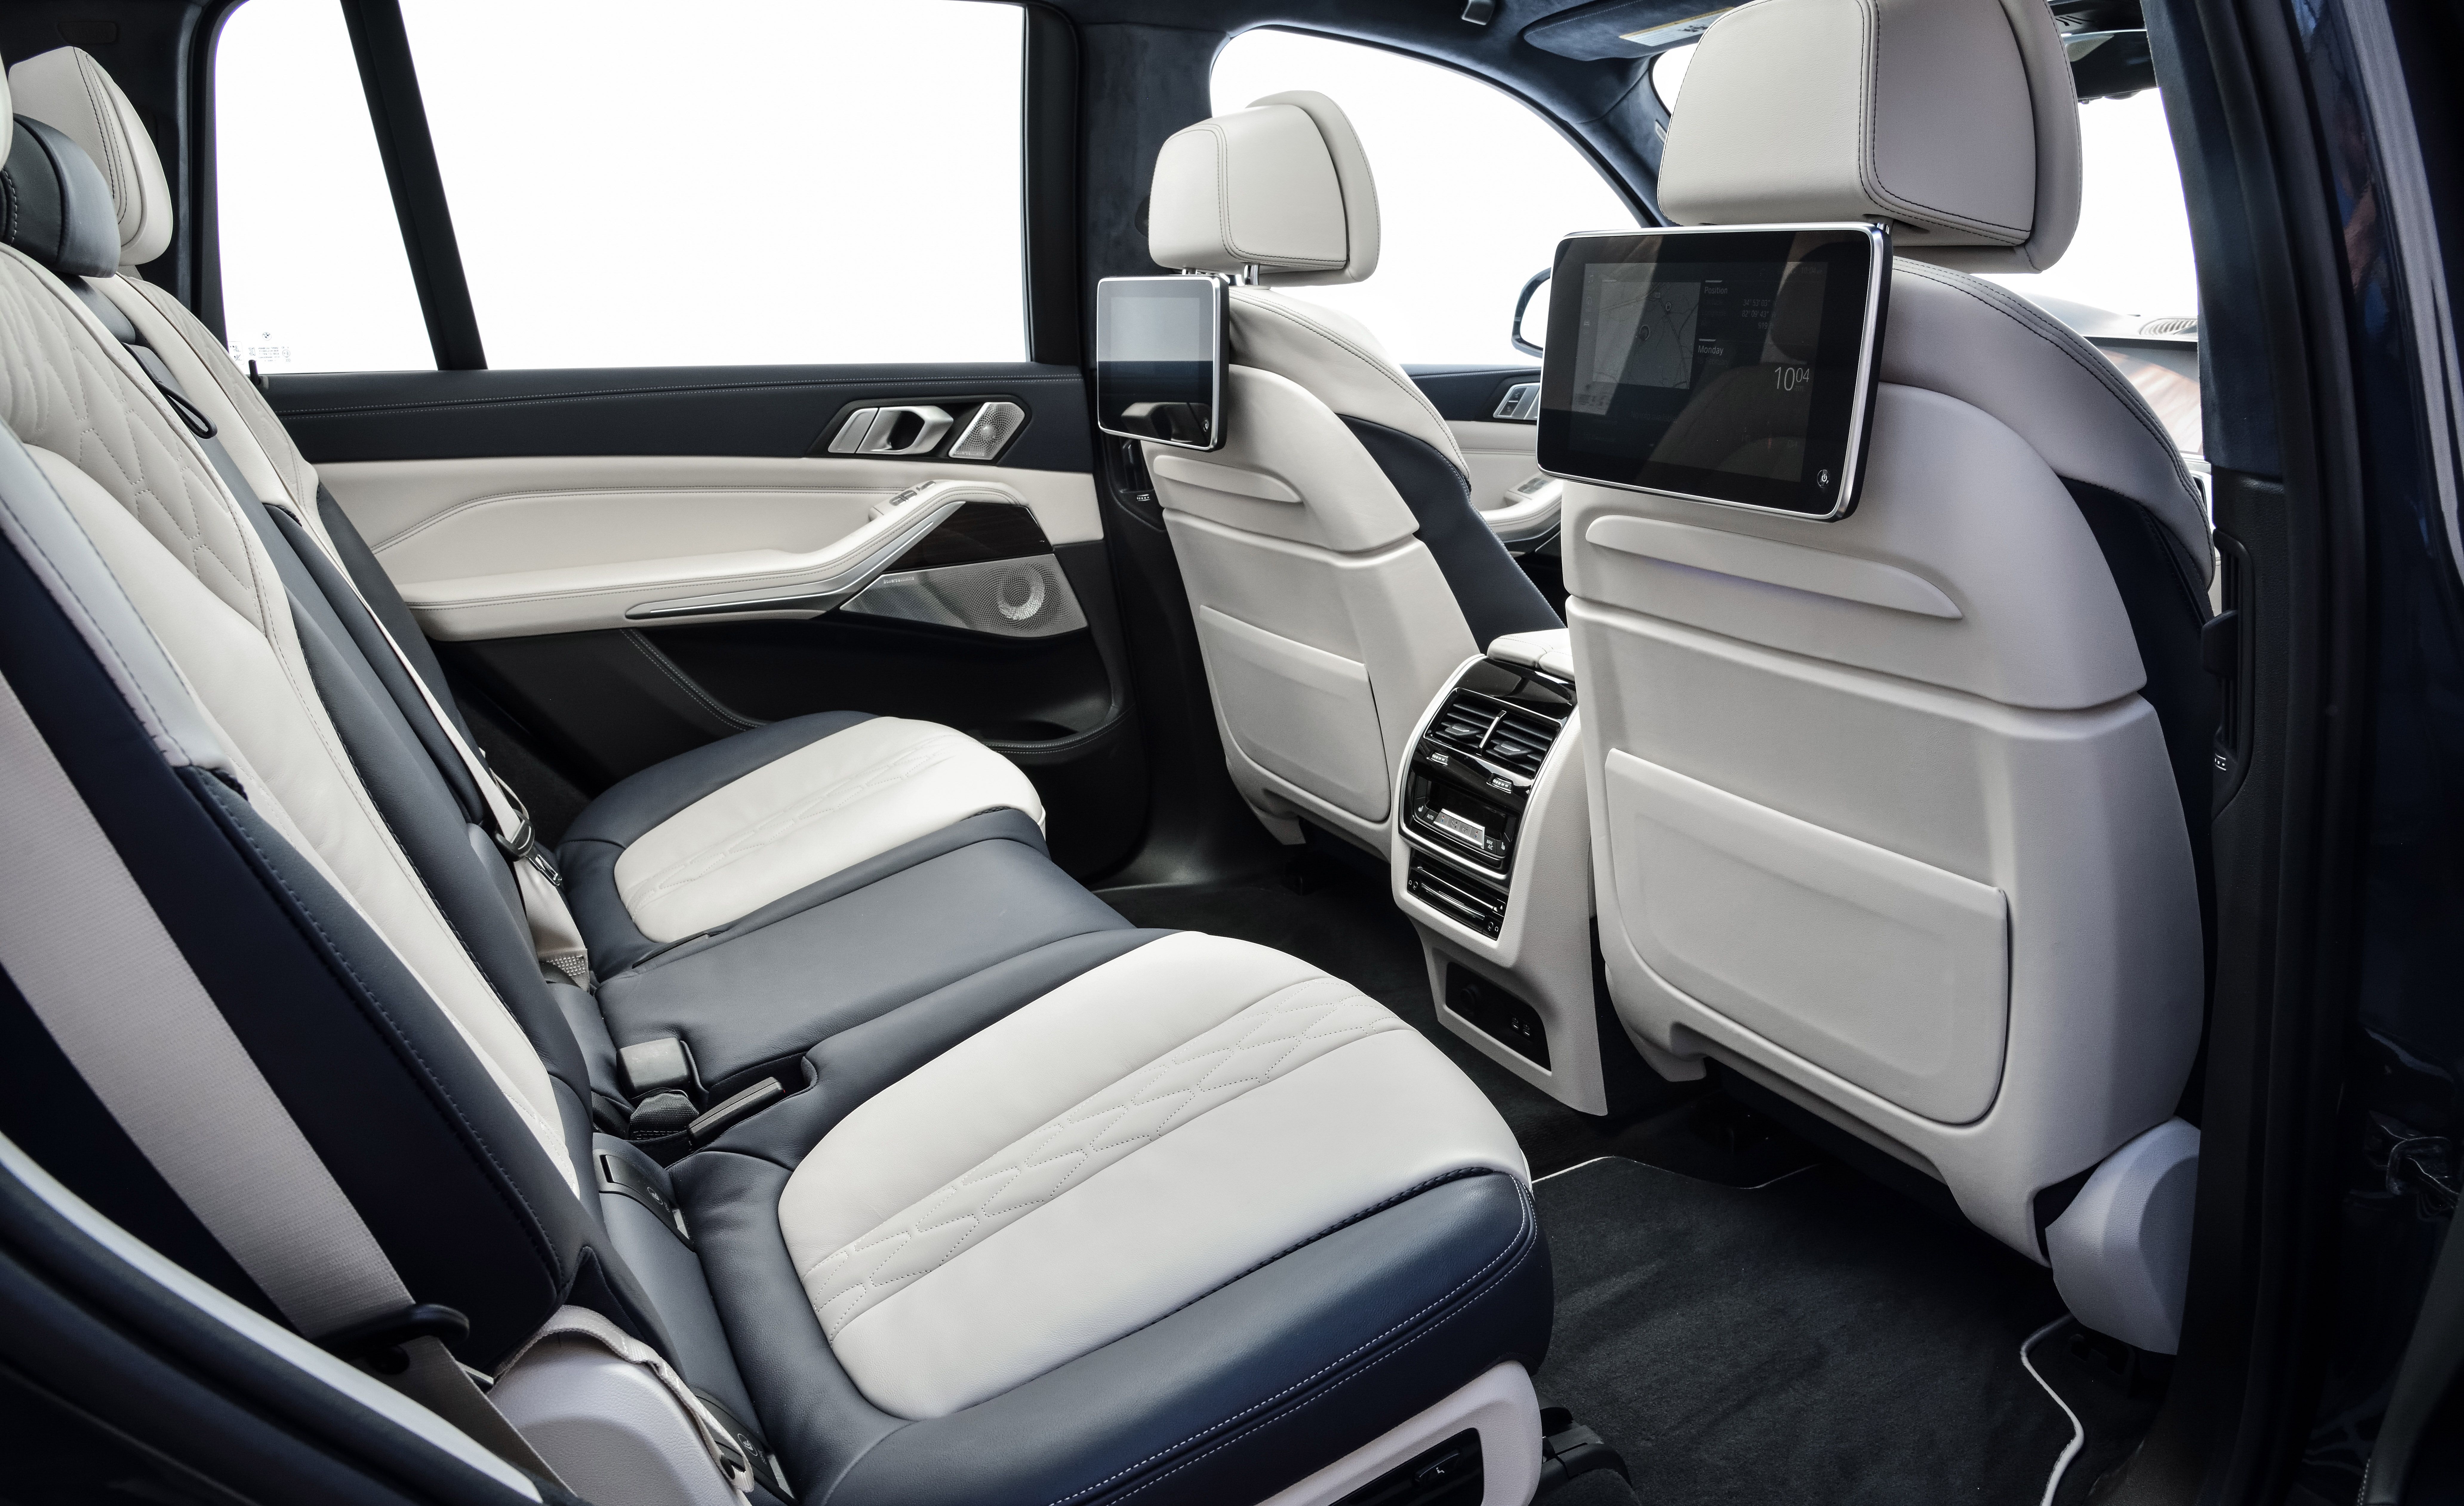 Bmw X7 Interior Seating - All About Car